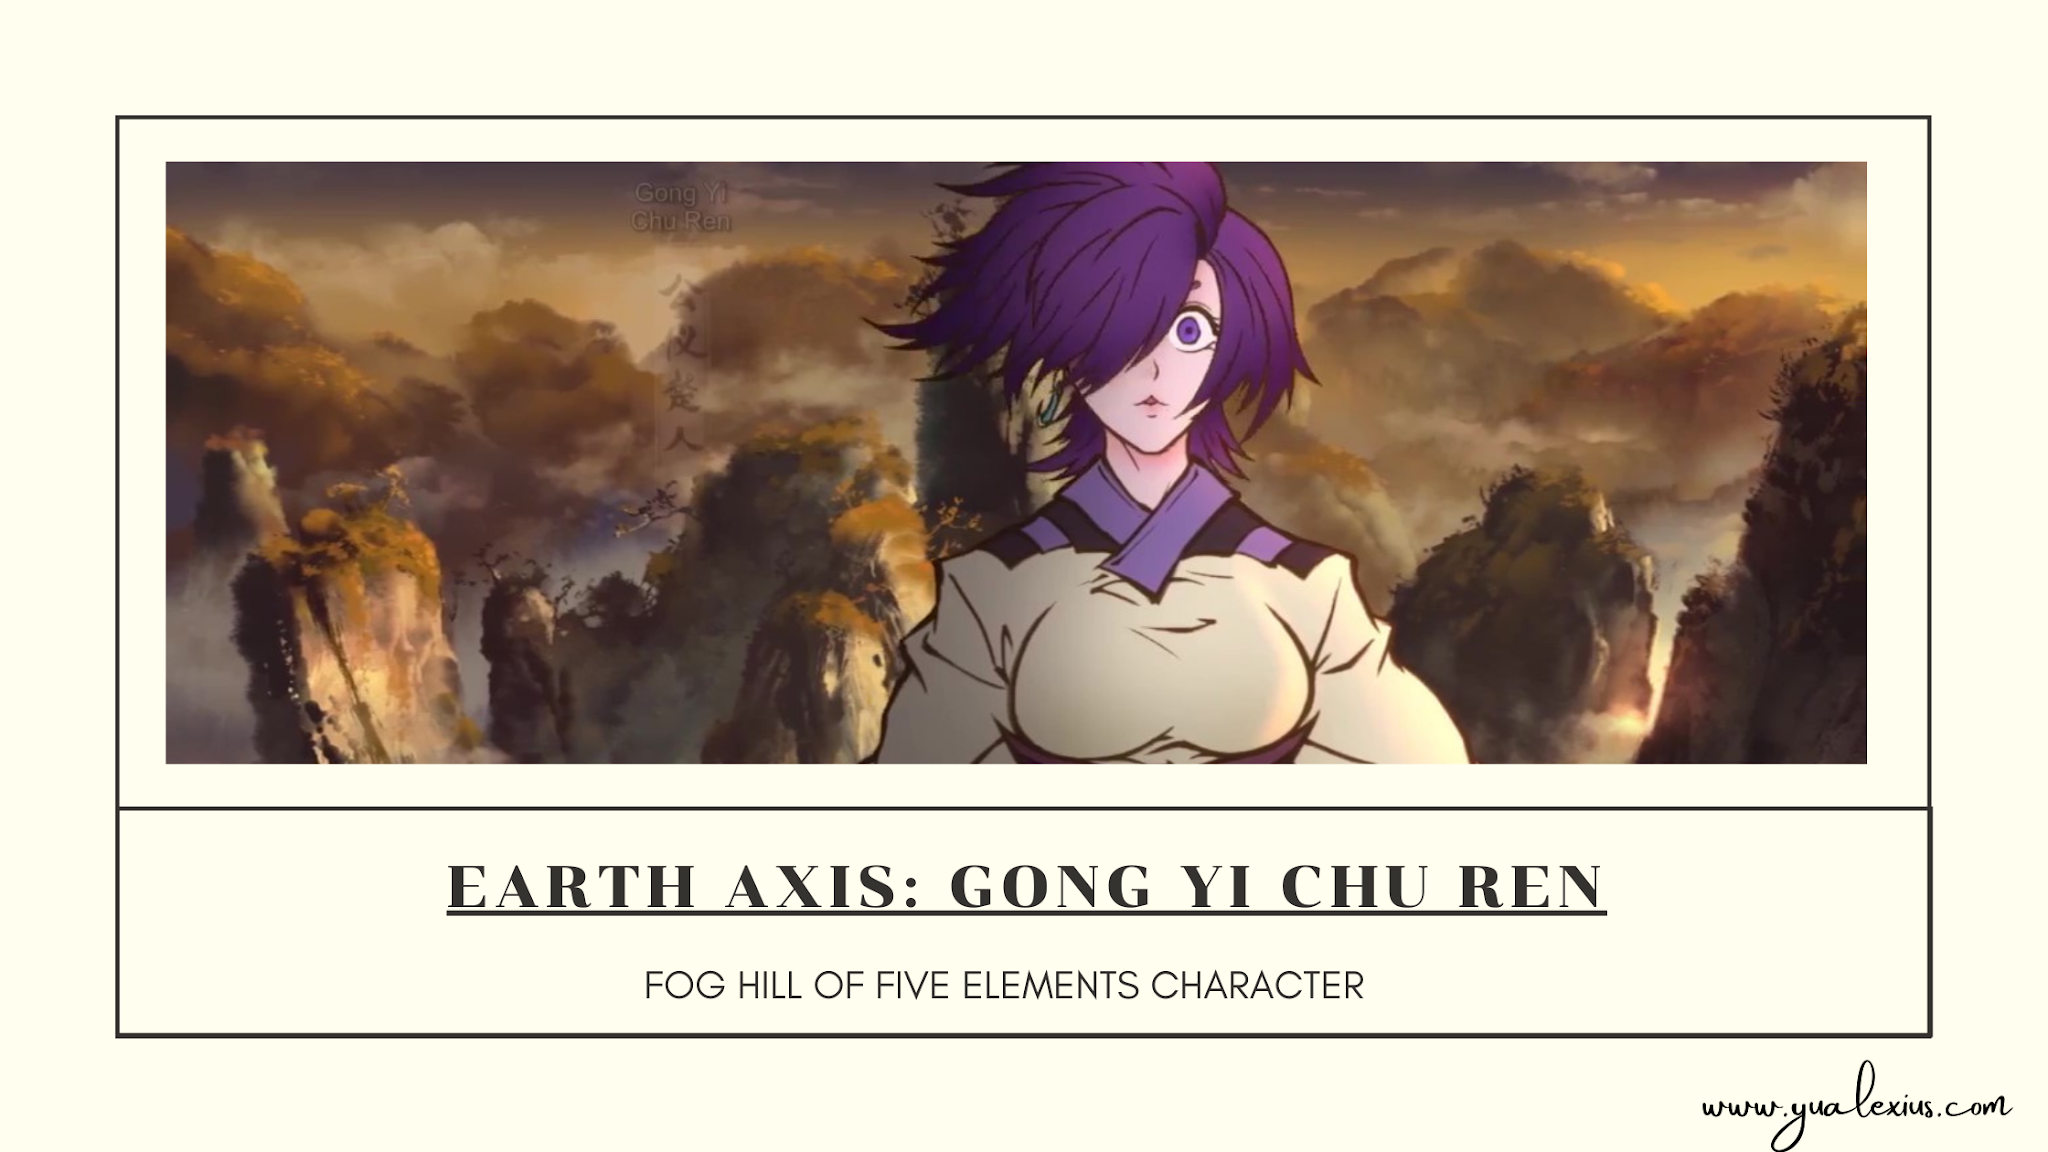 Fog Hill of Five Elements Anime Characters: The Envoys, Demons, and